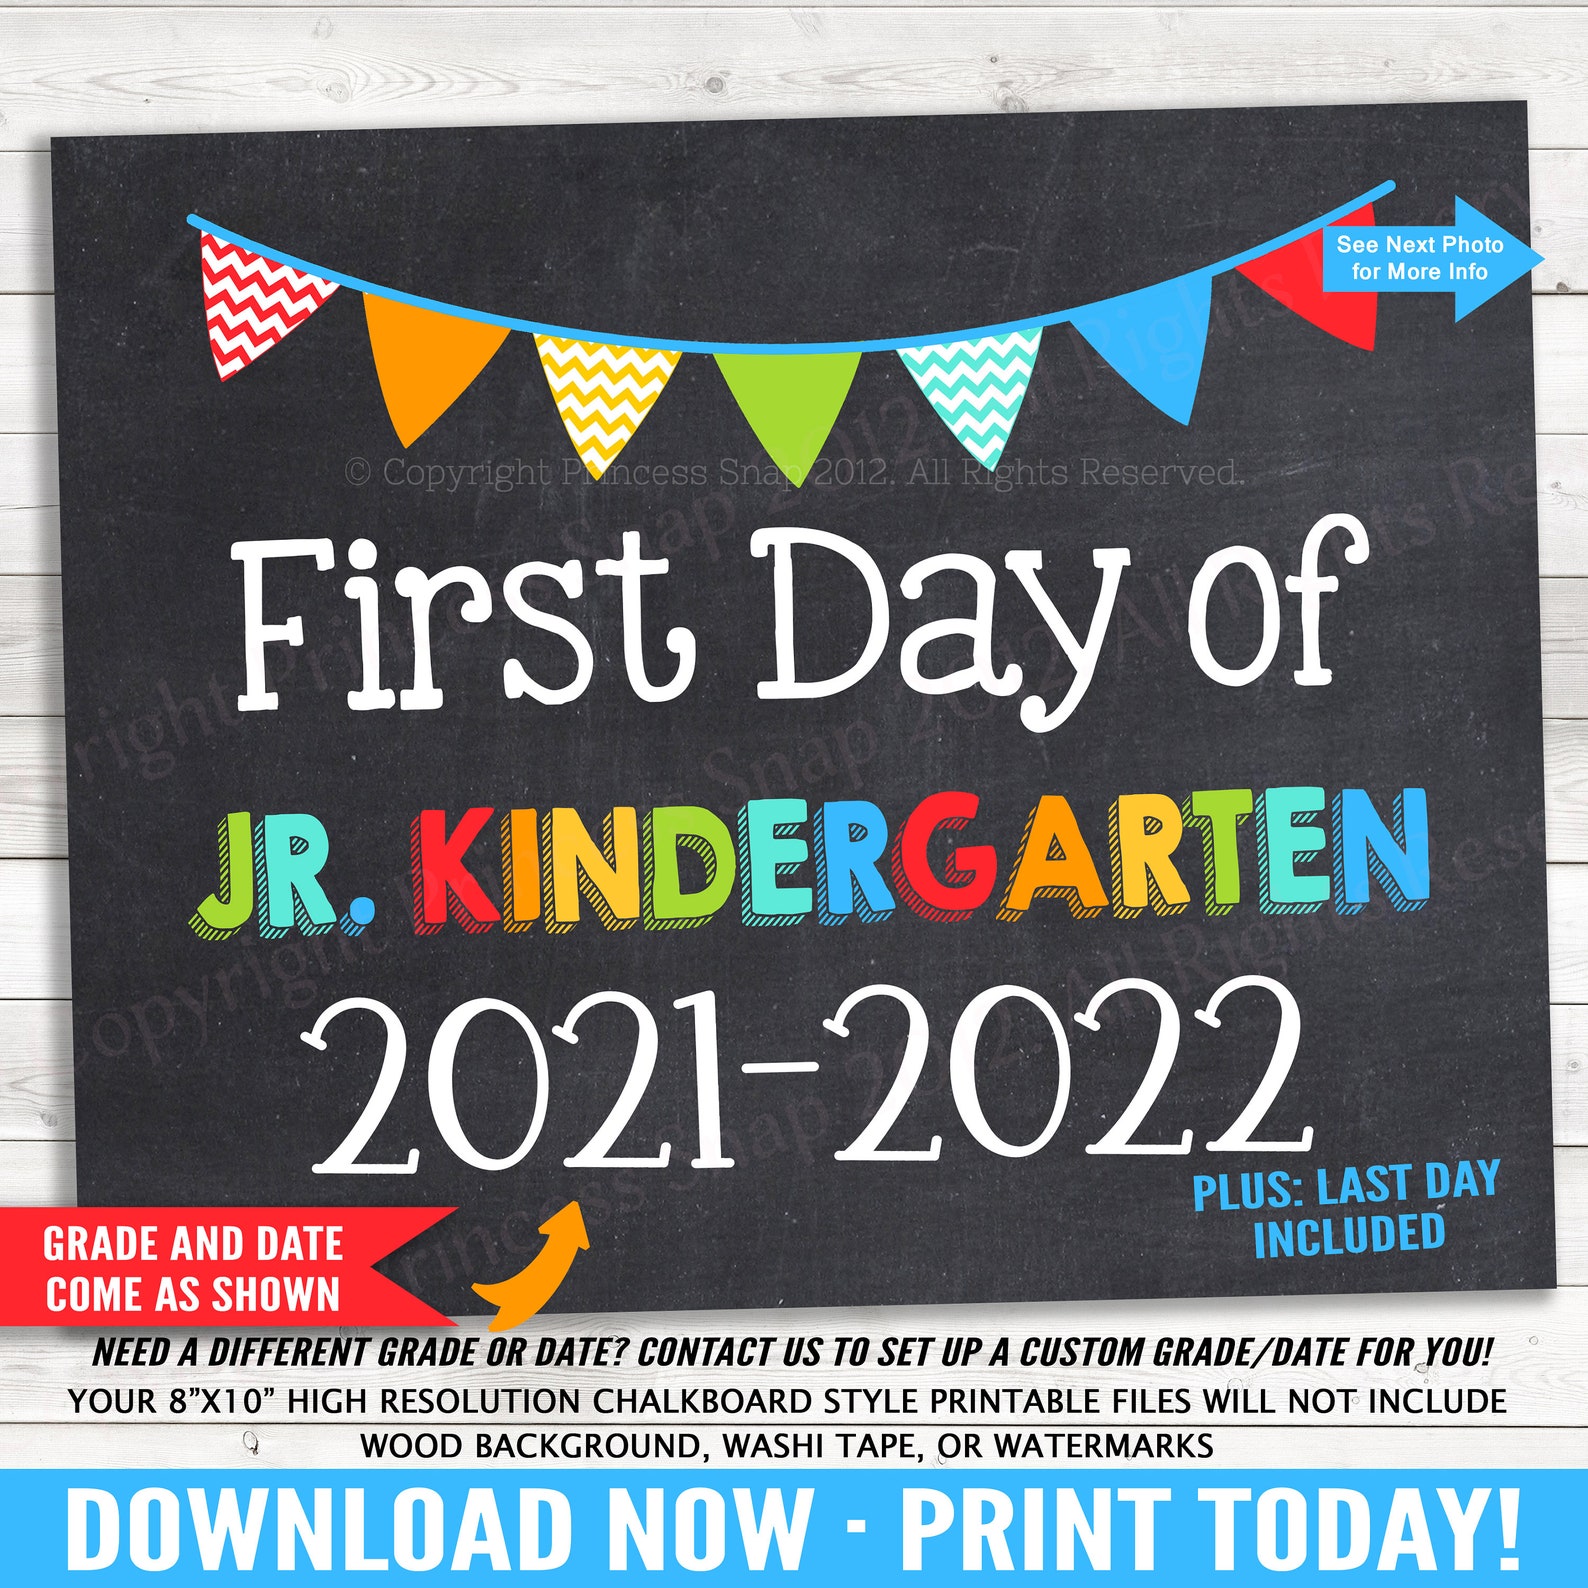 First And Last Day Of Jr Kindergarten 2021 2022 School Etsy